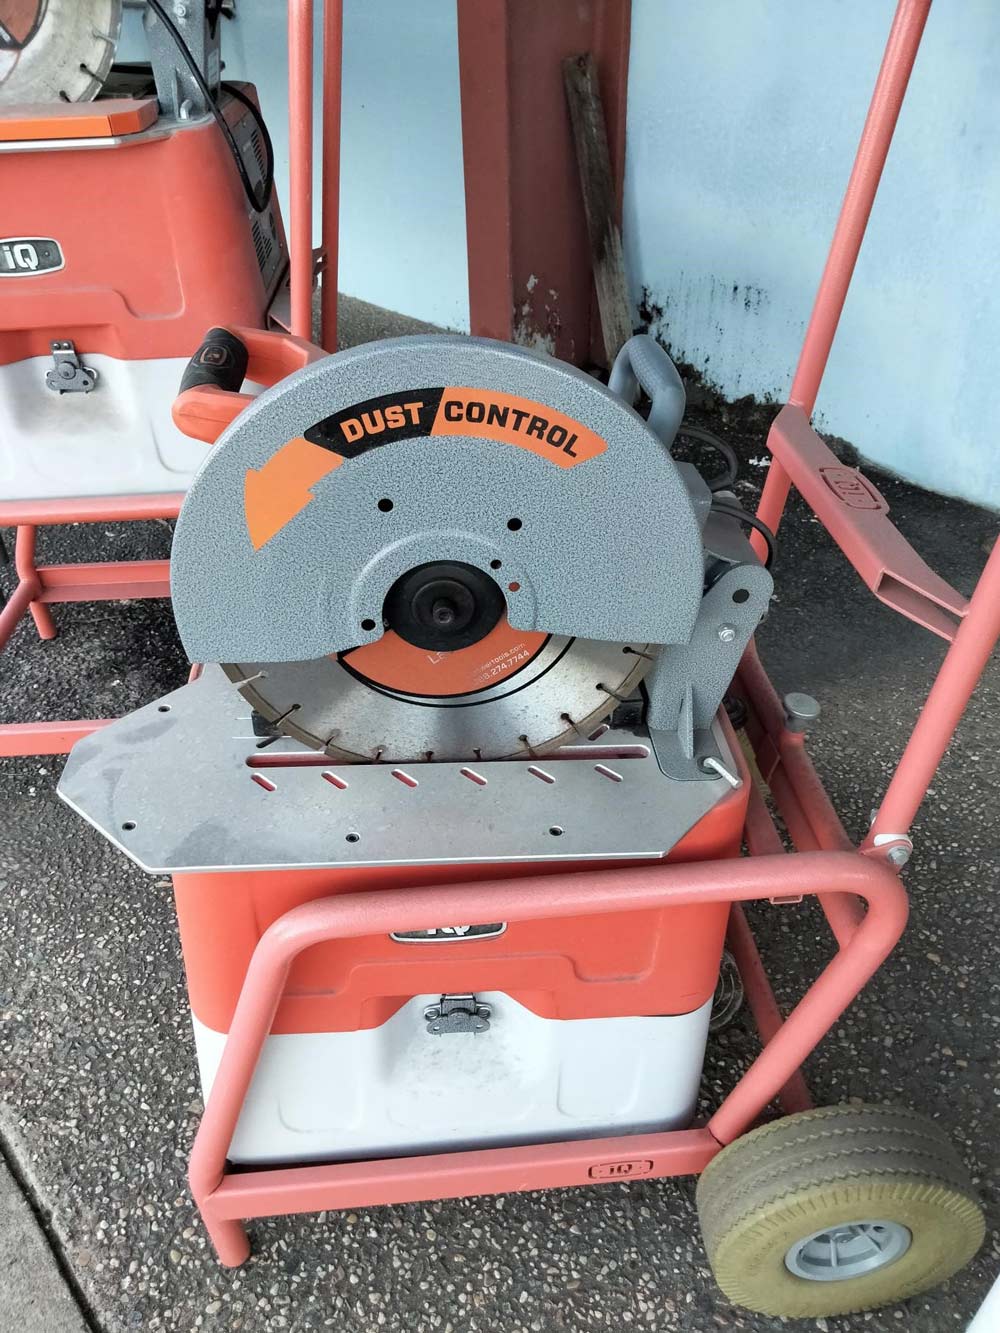 Dust Control Blade — Kev's Fasteners & Construction Supplies In Kawana QLD